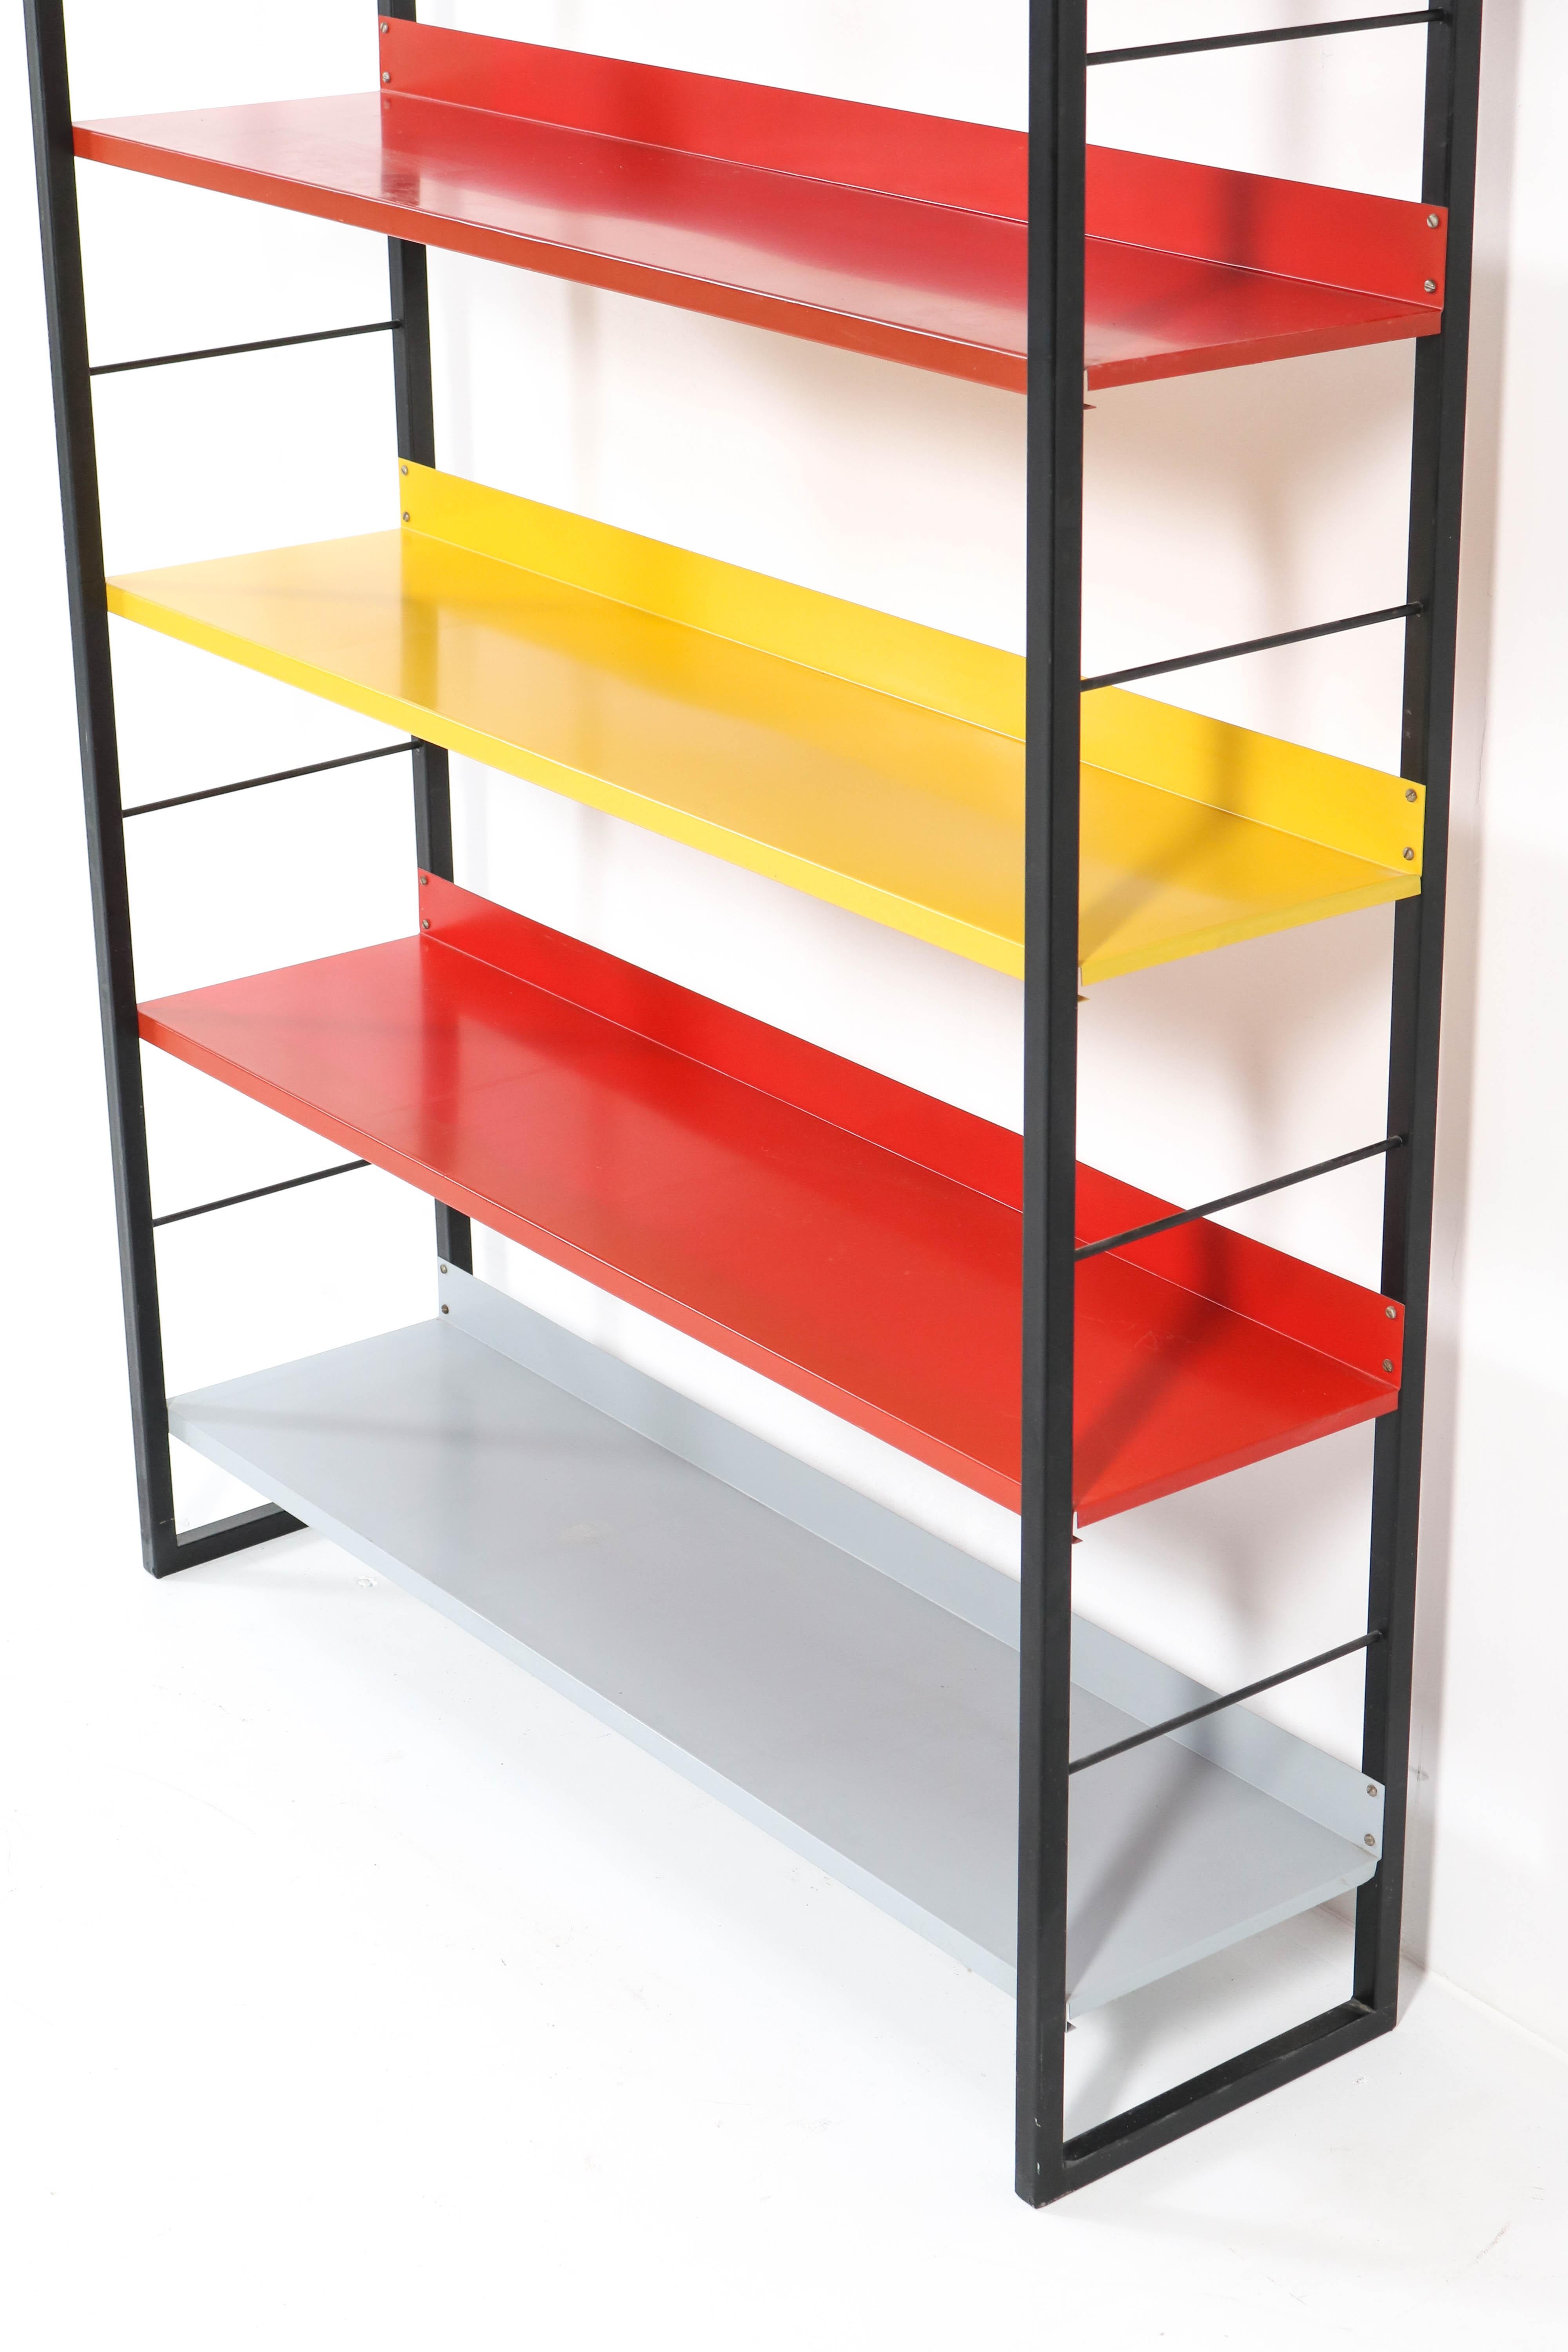 Mid-20th Century Mid-Century Modern Lacquered Metal Bookcase by Adriaan Dekker for Tomado, 1958